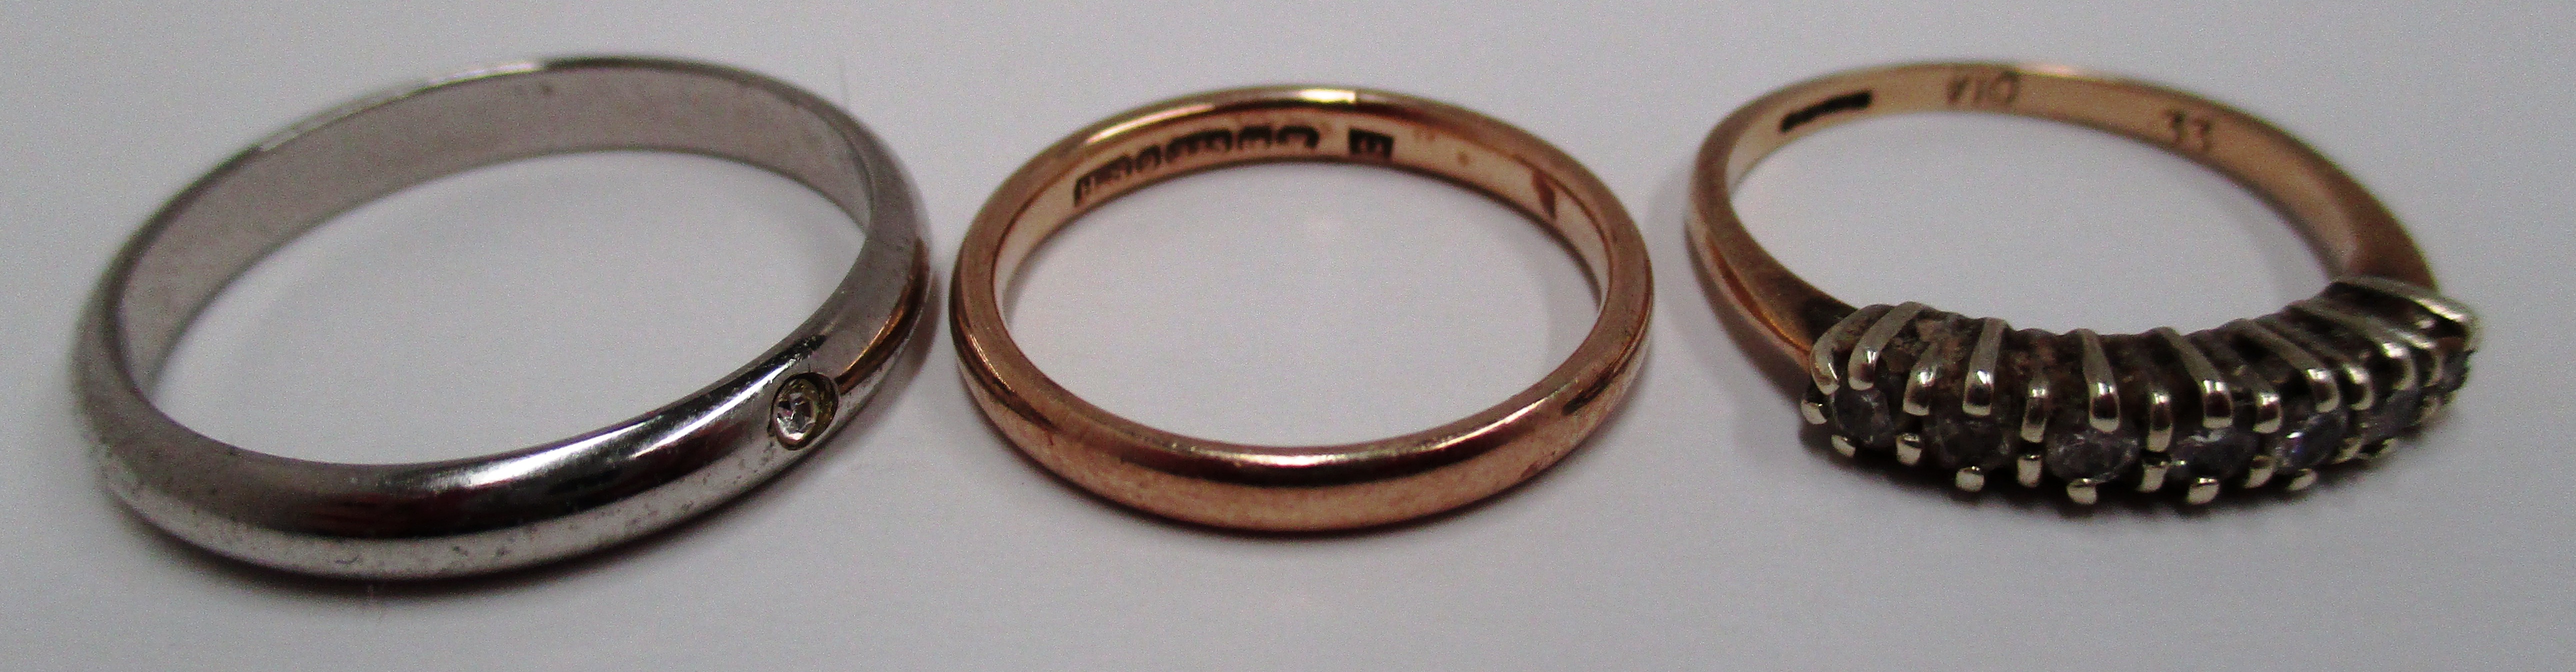 9ct yellow gold wedding band 1.9g, one unmarked ring and a 9ct yellow gold seven stone ring 1.